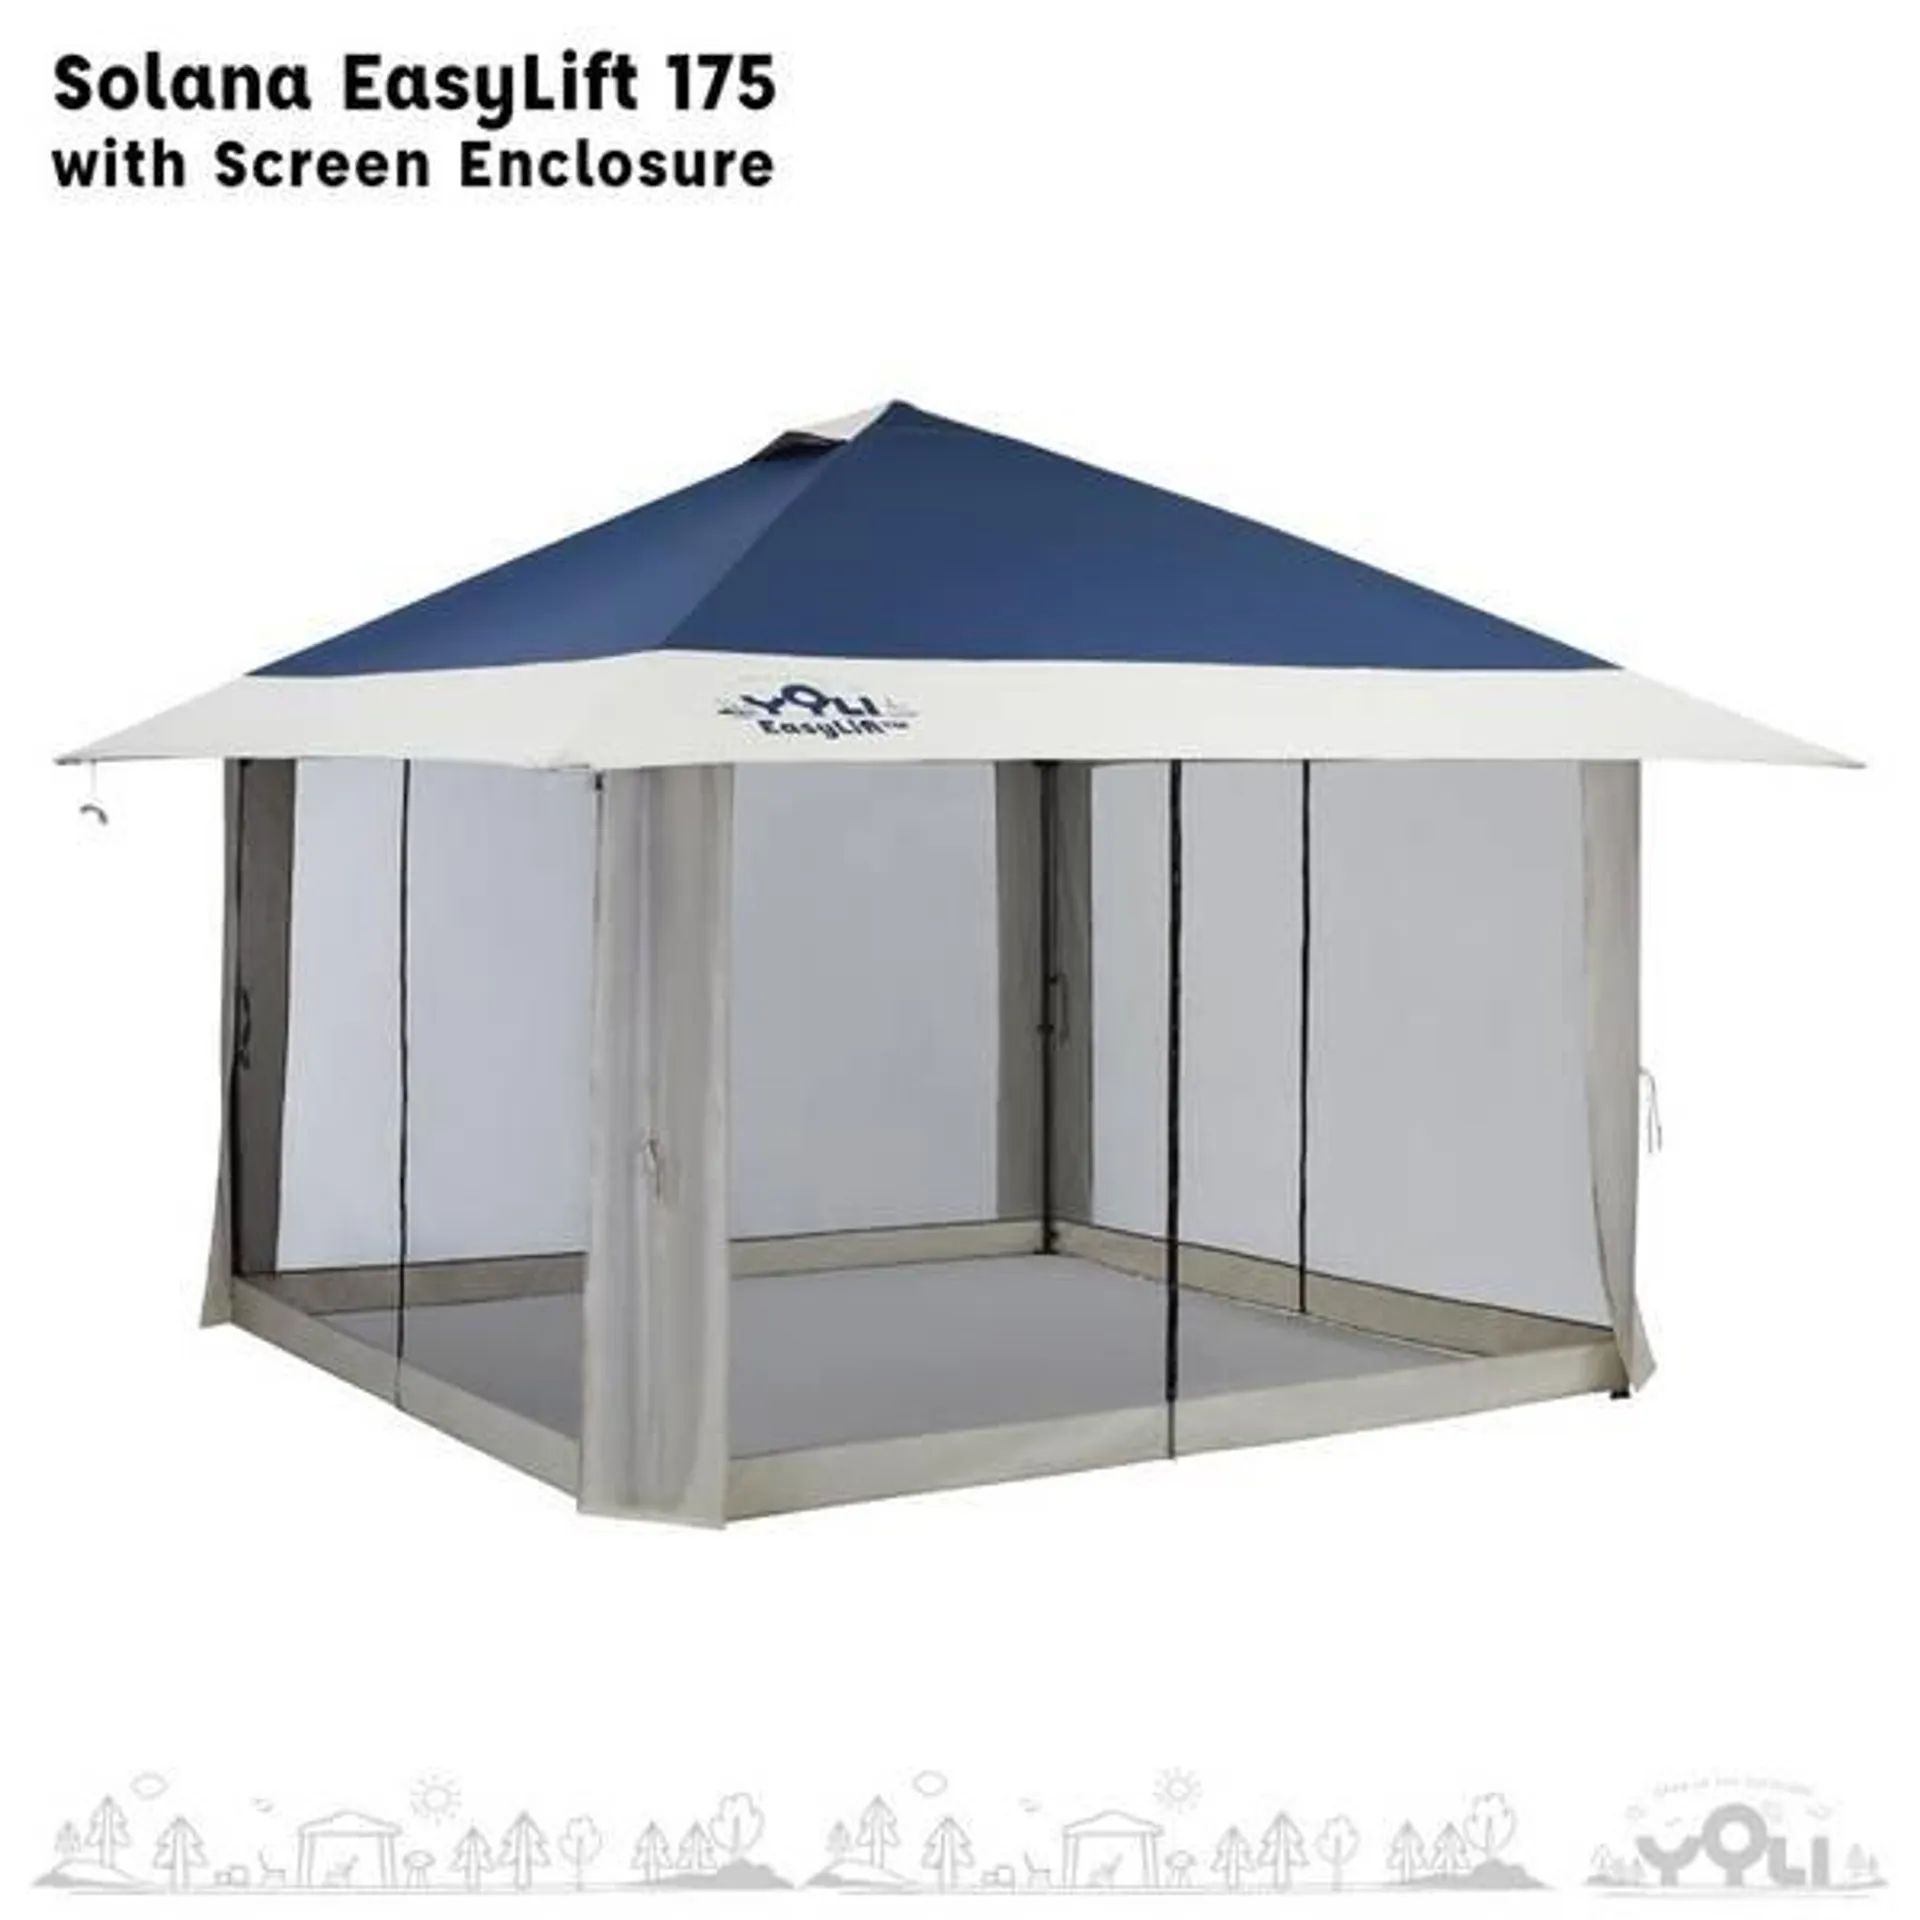 13'x13' Solana EasyLift Instant Canopy with Screen Enclosure